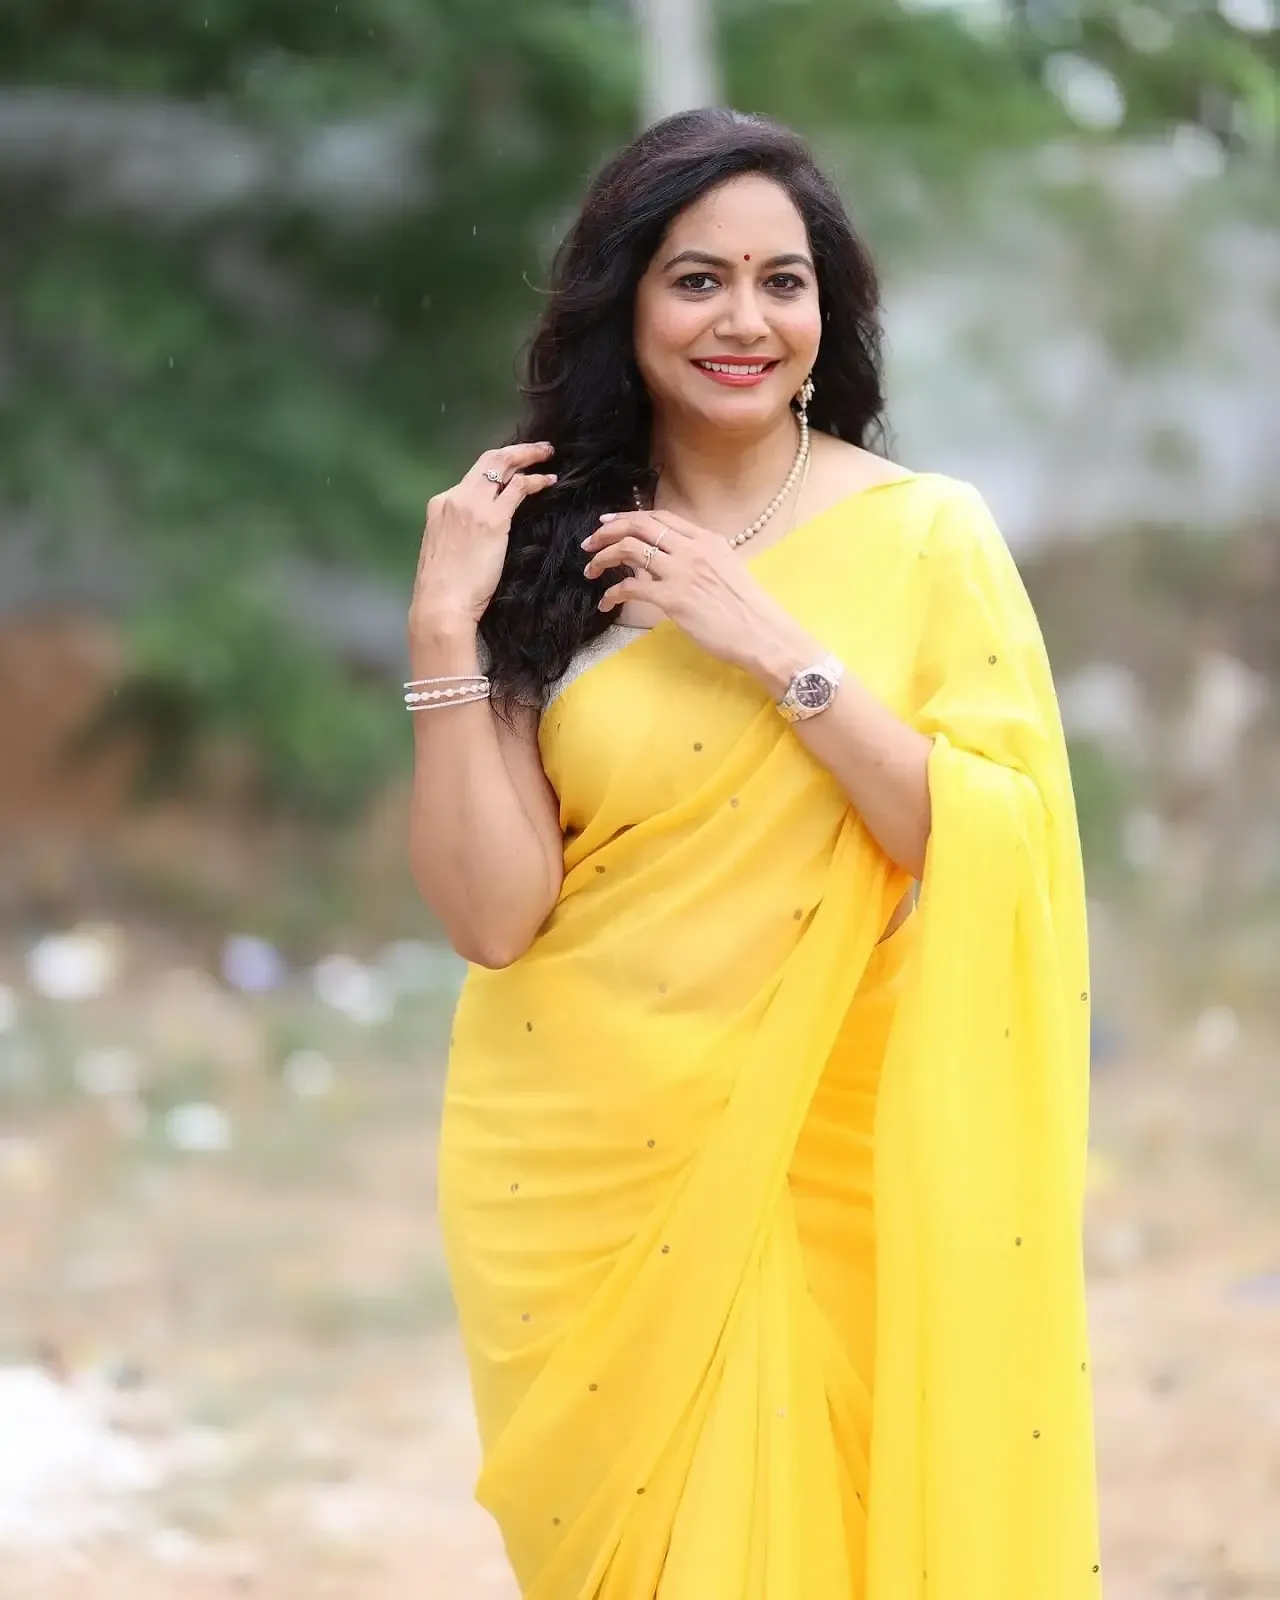 BEAUTIFUL INDIAN SINGER SUNITHA SMILE IMAGES IN YELLOW SAREE 1